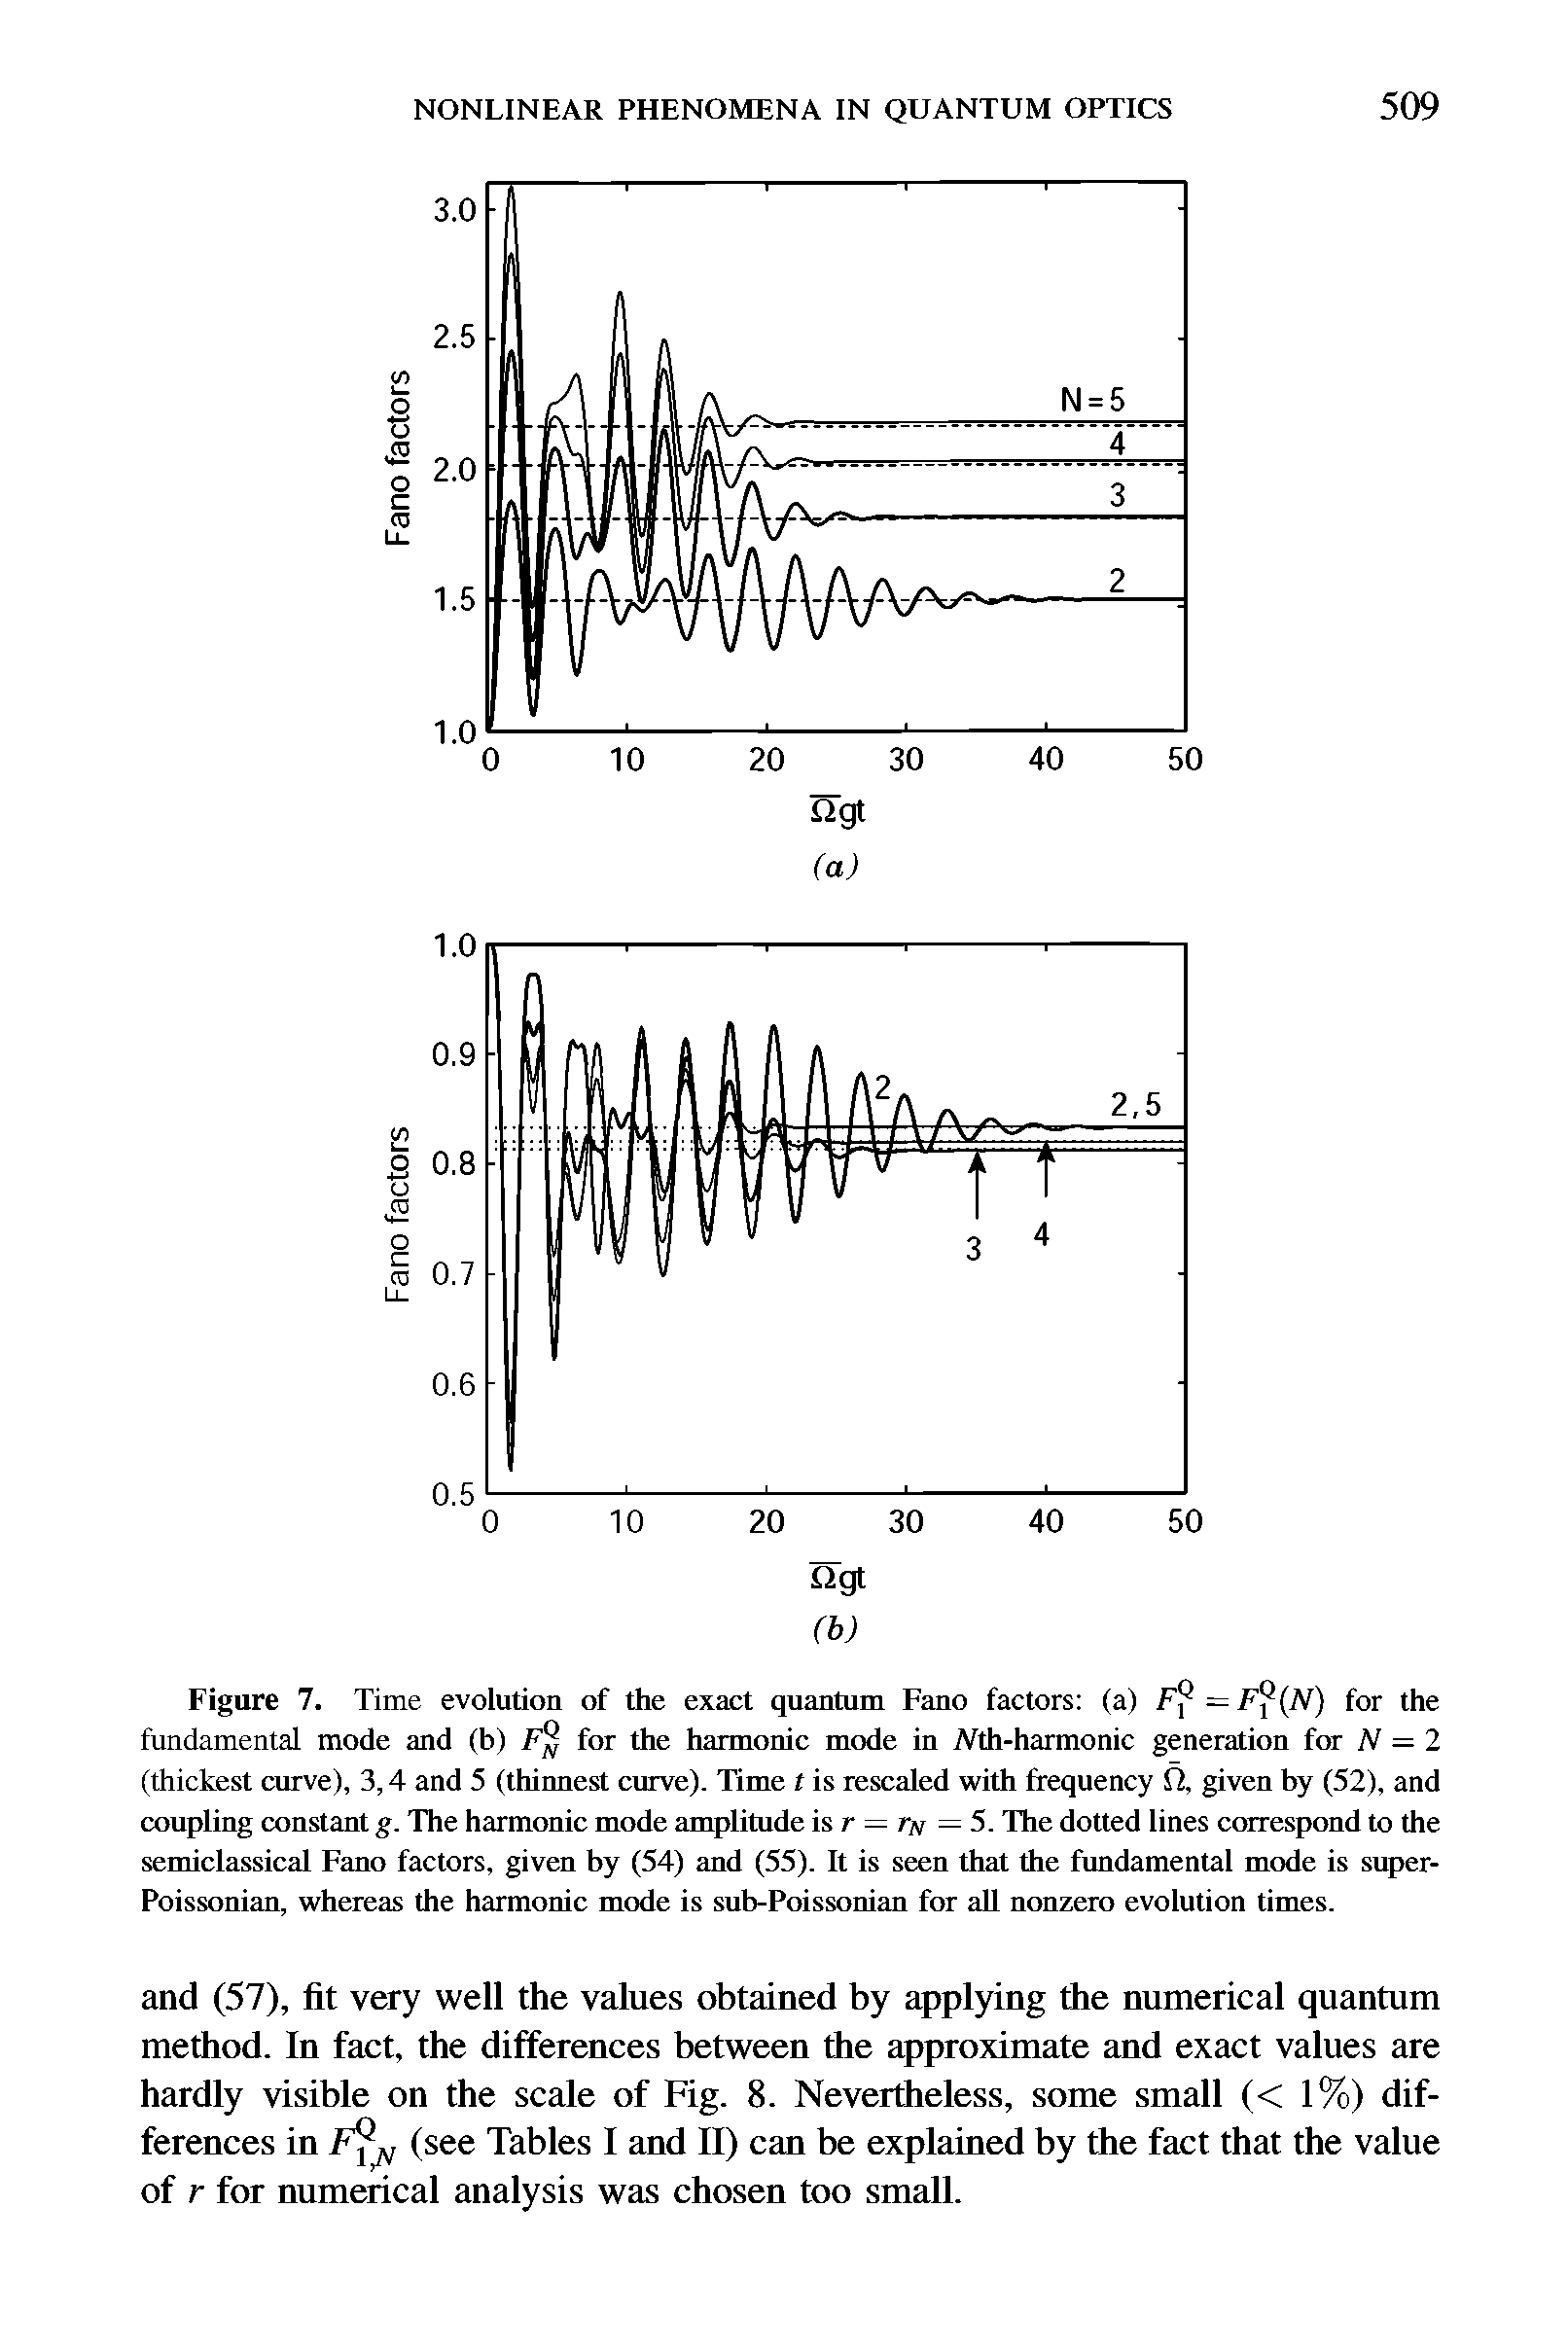 Figure 7. Time evolution of the exact quantum Fano factors (a) Fp =F (N) for the fundamental mode and (b) F for the harmonic mode in Mh-harmonic generation for N = 2 (thickest curve), 3,4 and 5 (thinnest curve). Time t is rescaled with frequency fi, given by (52), and coupling constant g. The harmonic mode amplitude is r r 5. The dotted lines correspond to the semiclassical Fano factors, given by (54) and (55). It is seen that the fundamental mode is super-Poissonian, whereas the harmonic mode is sub-Poissonian for all nonzero evolution times.